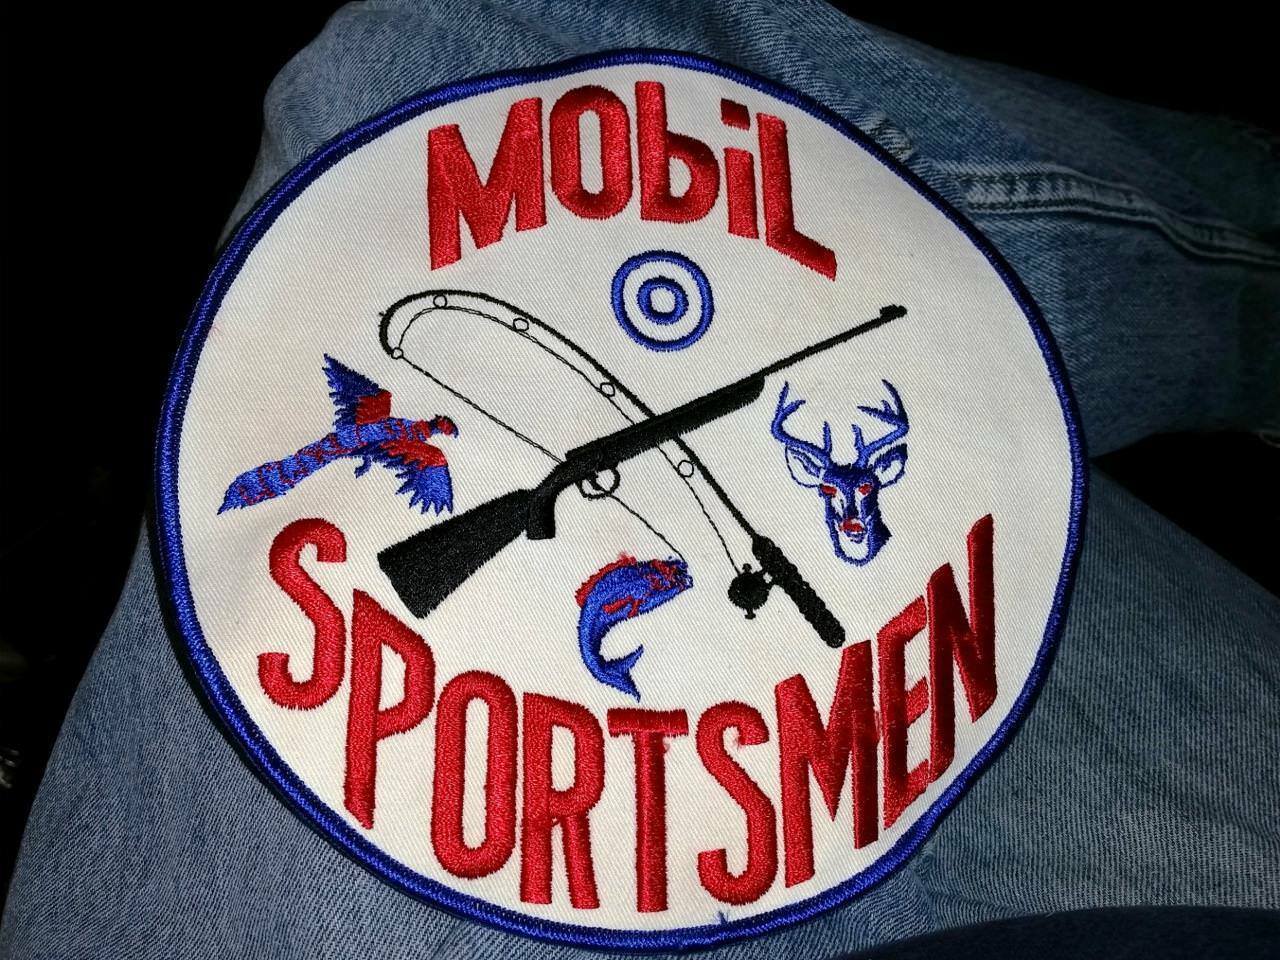 Primary image for Mobil Sportsmen Collectible Patch Hunting Fishing 8"  diameter